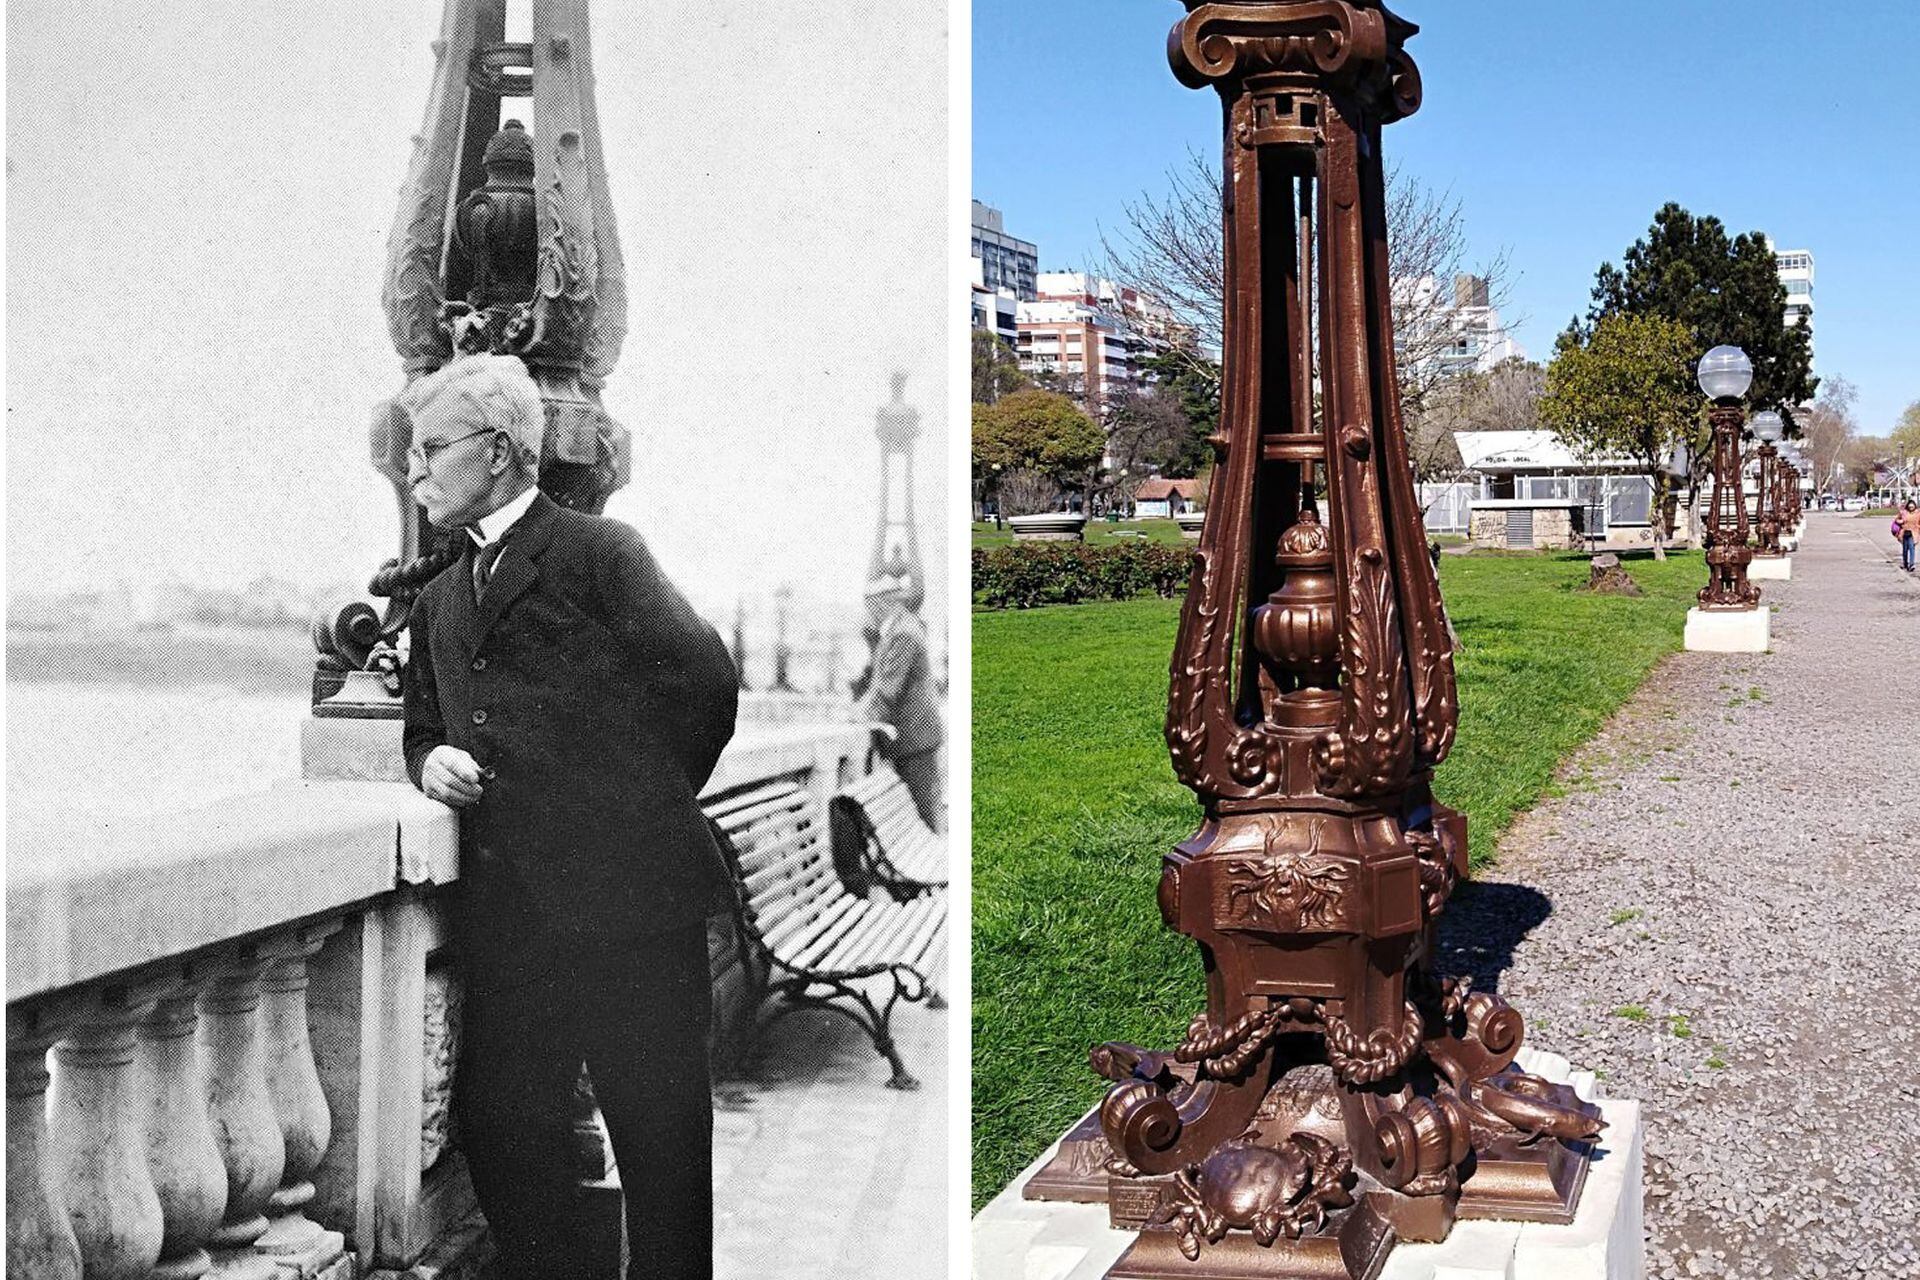 The photographer José Virginio Freitas in the old French boulevard (where he had his shop) and next to the beautiful lampposts that today embellish Miter Square.